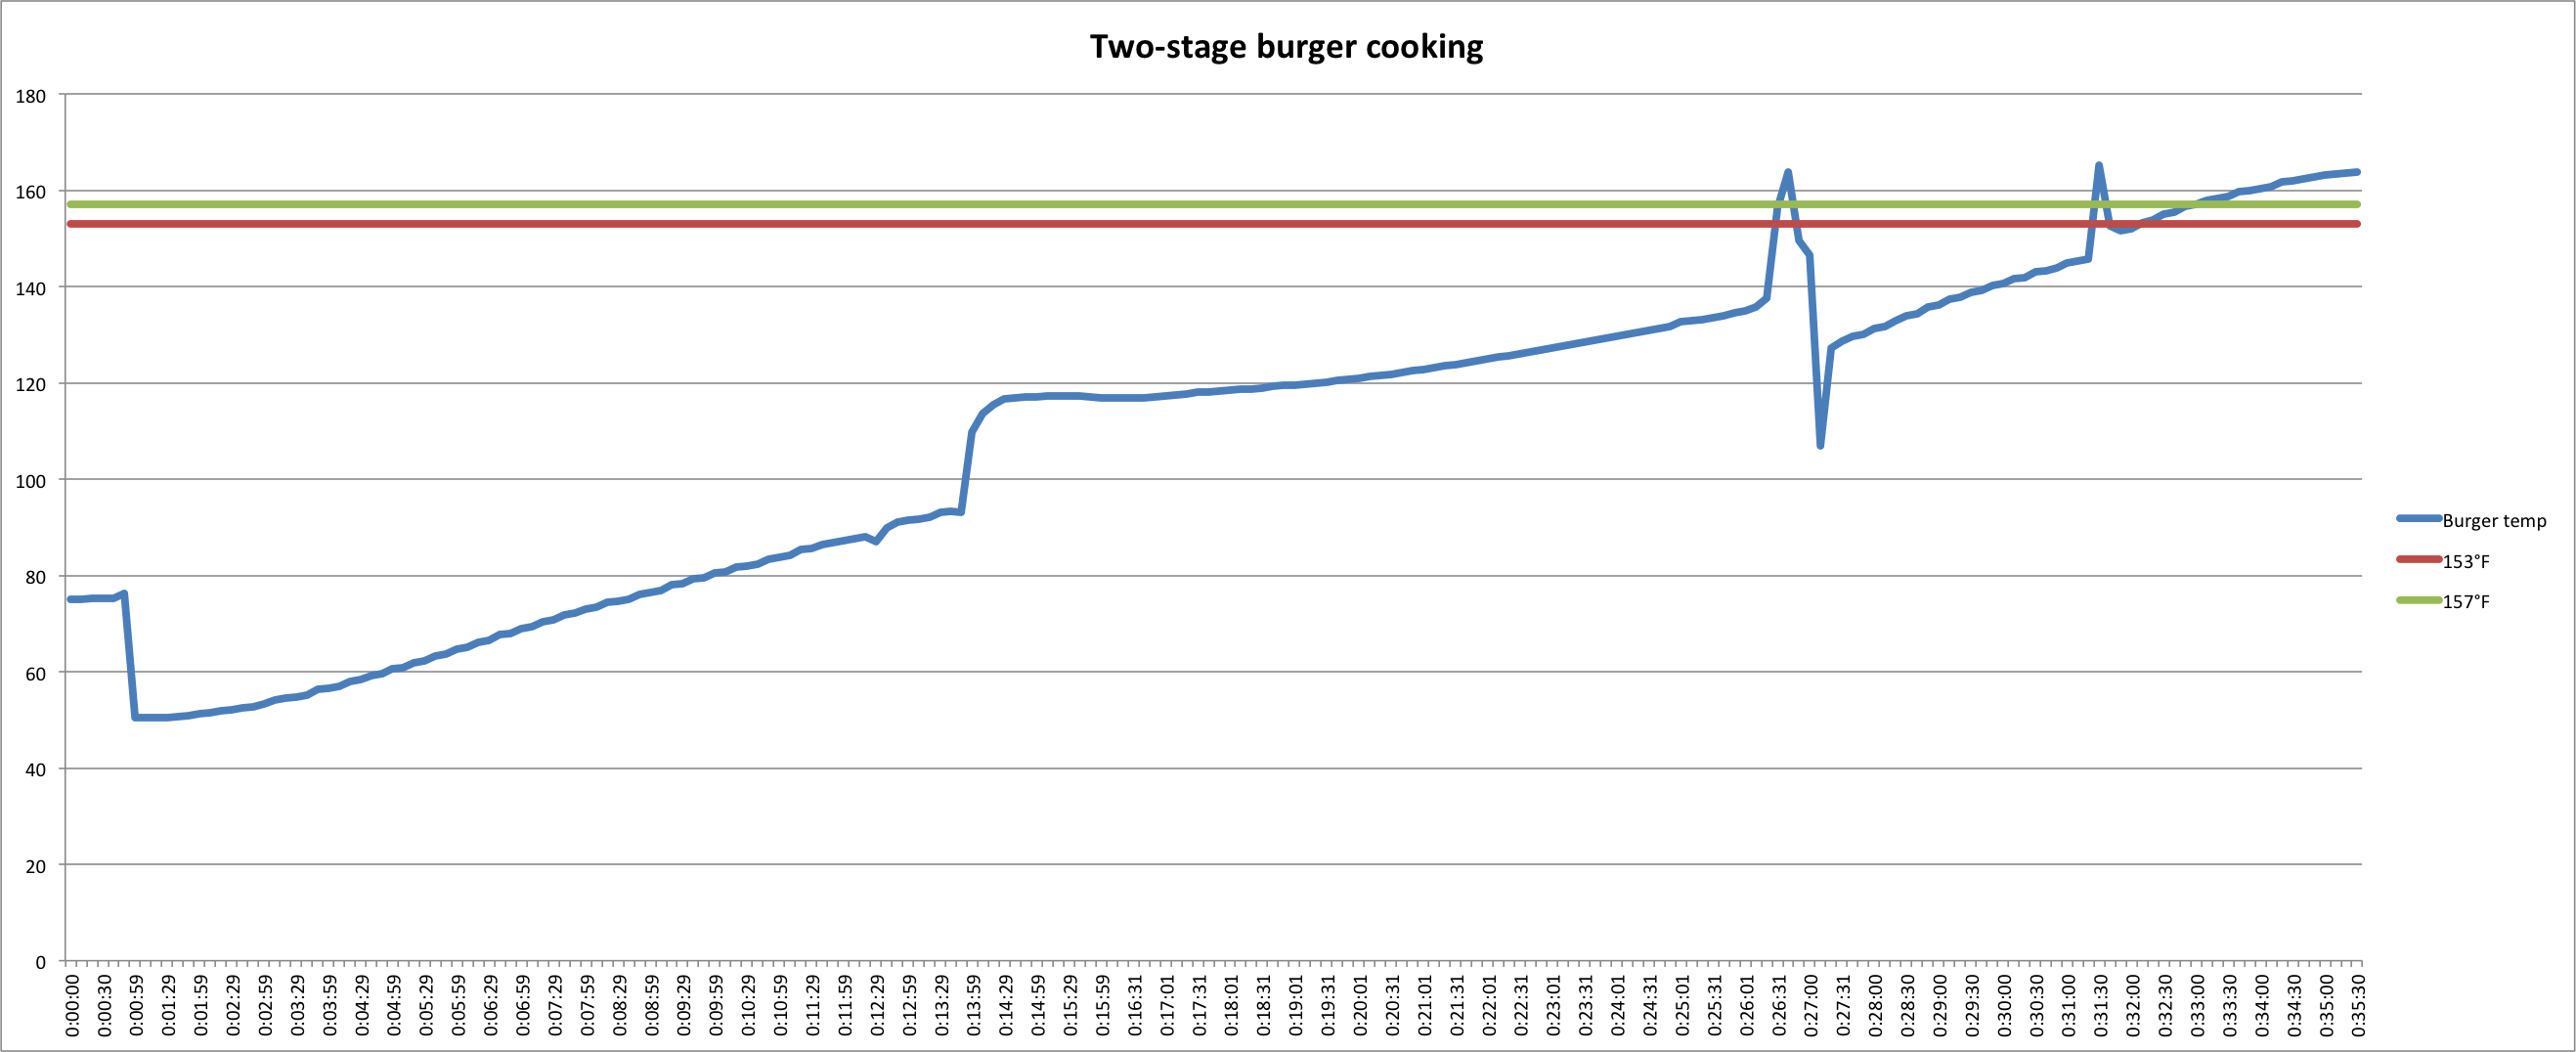 Beef Cooking Temp Chart